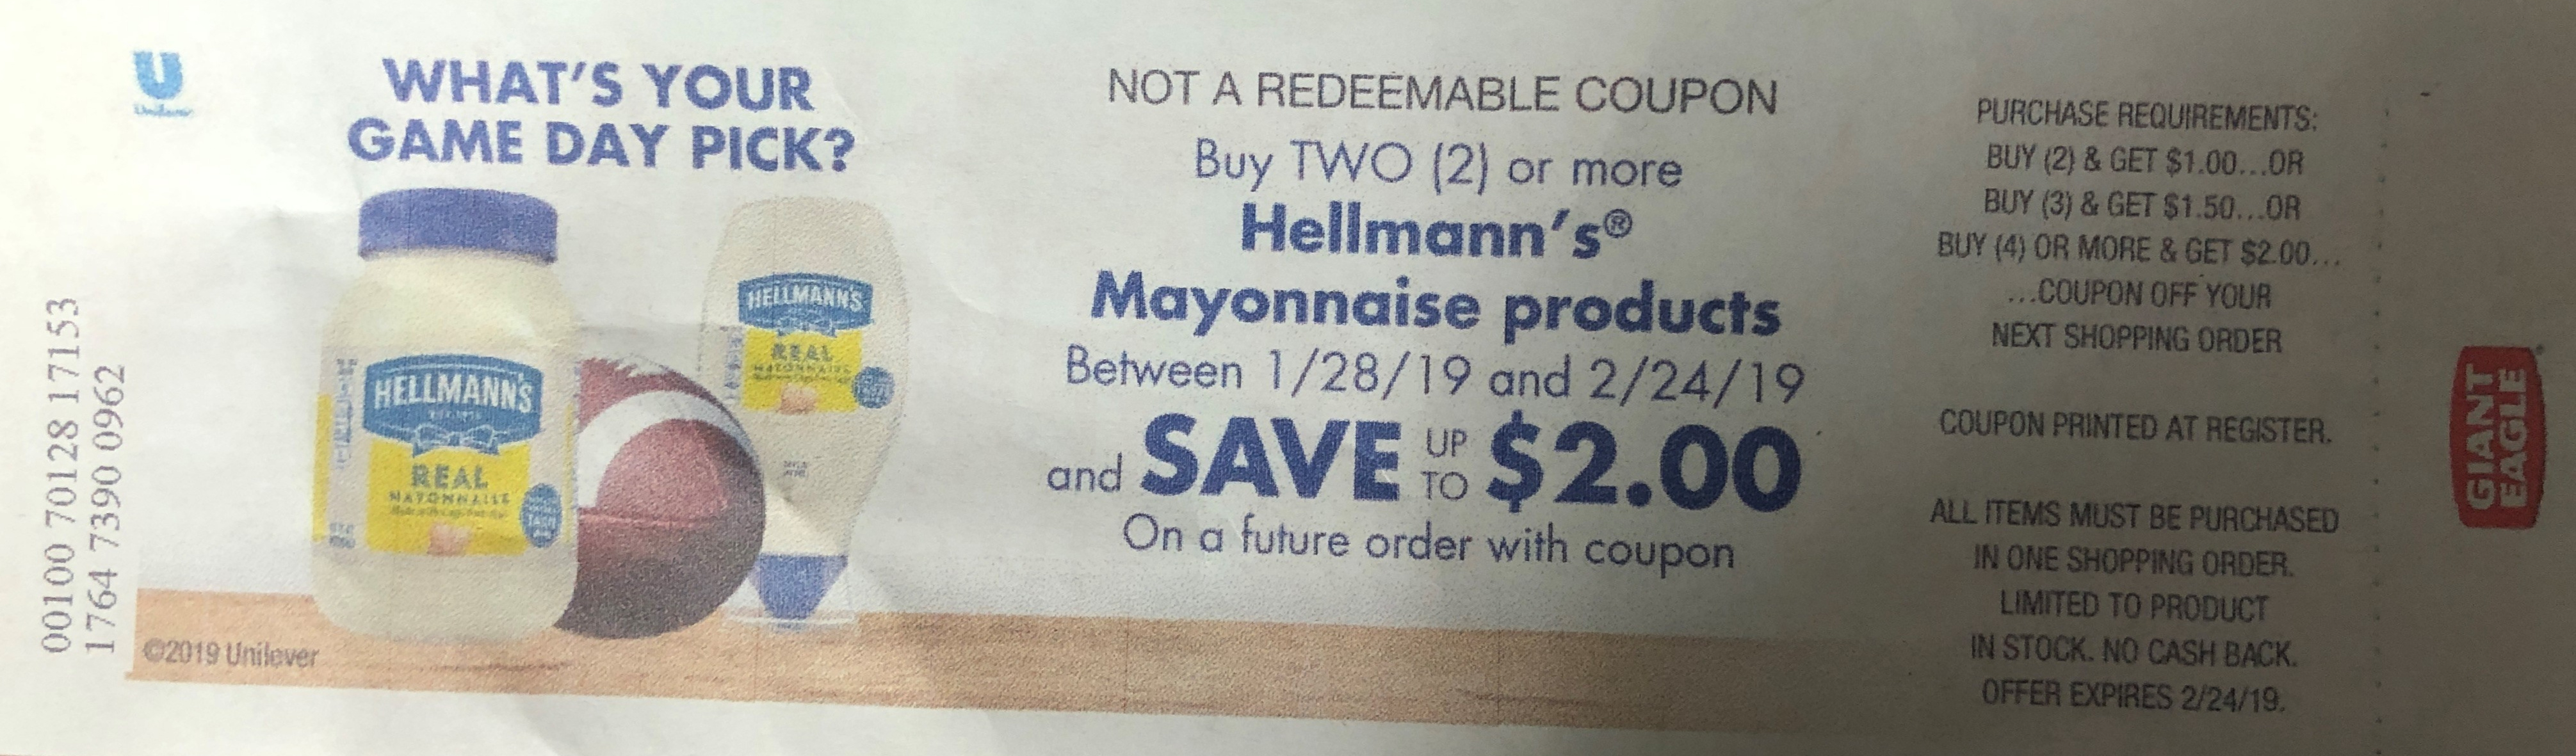 Hellmann&amp;#039;s® Coupons (Free) - Hellmann&amp;#039;s Mayo Coupons - Free Printable Giant Eagle Coupons